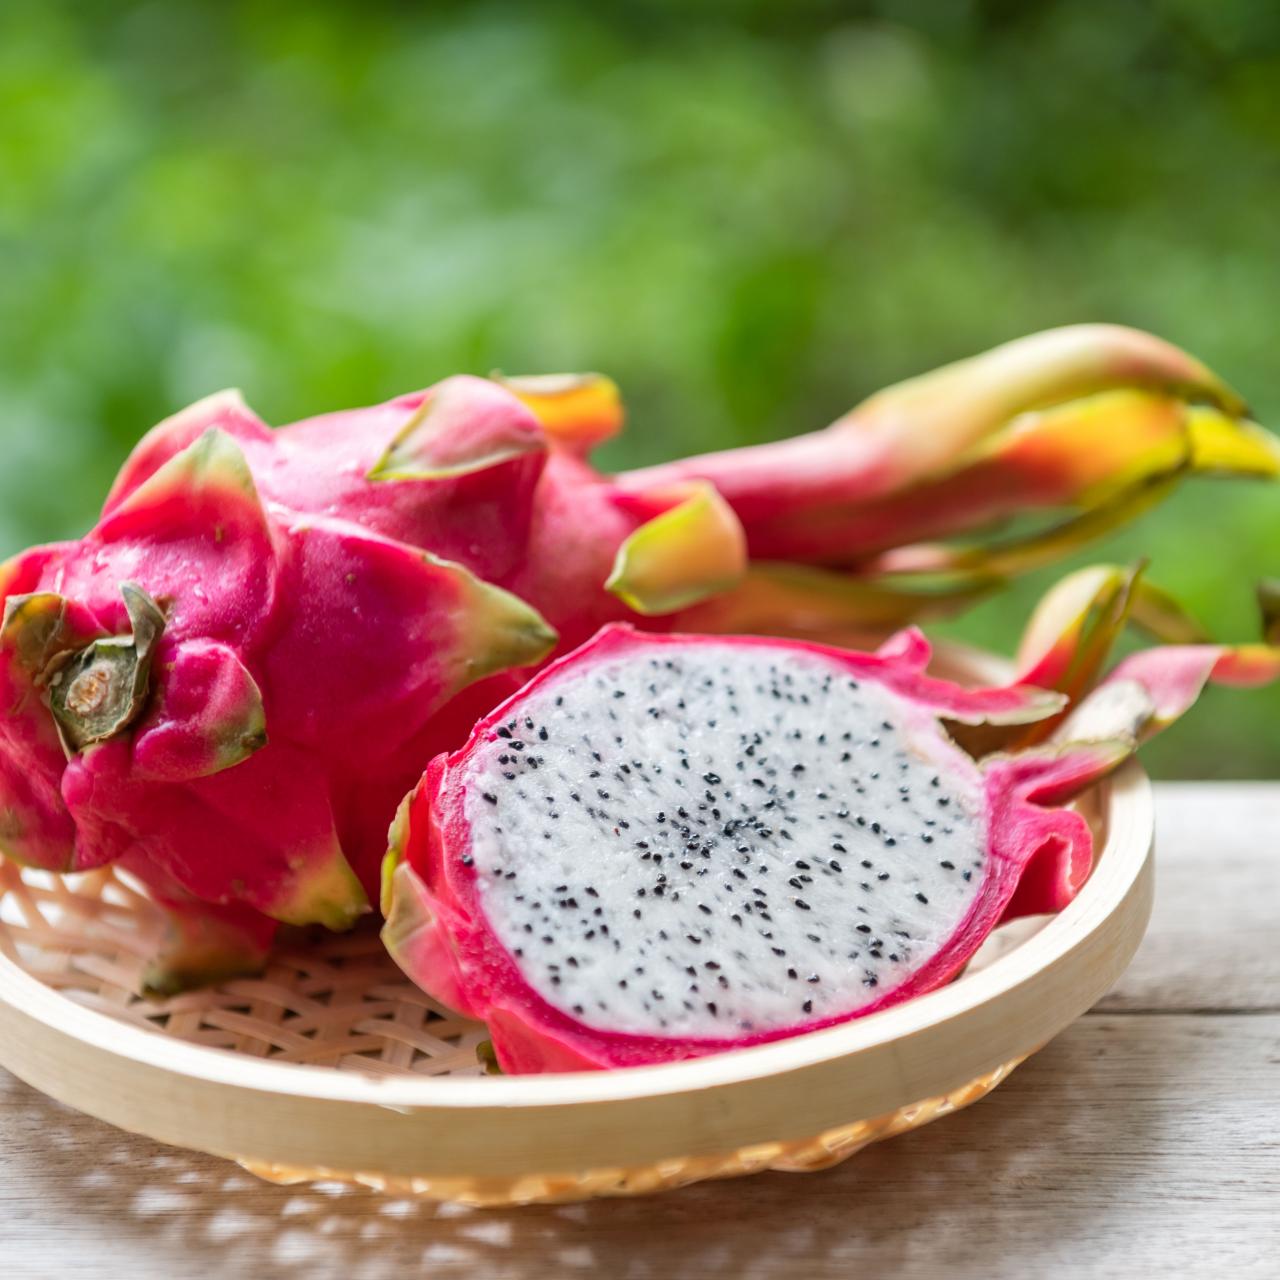 Dragon Fruit vs Pitaya: What's The Difference?